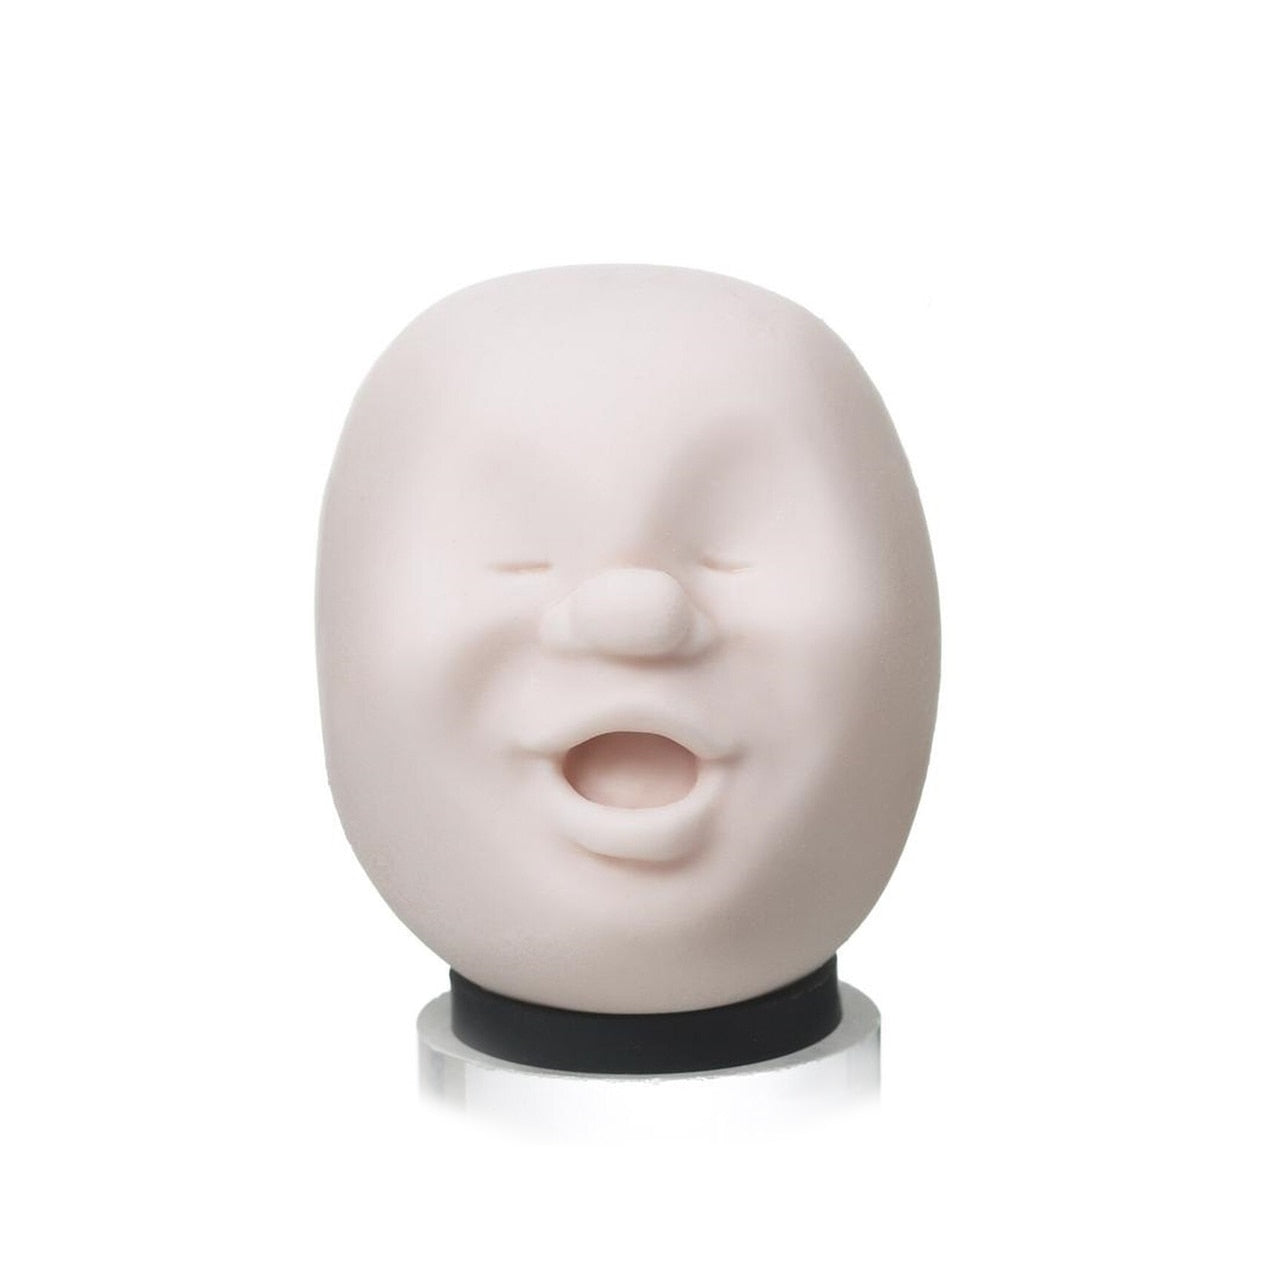 FACE OF THE MOON STRESS BALL